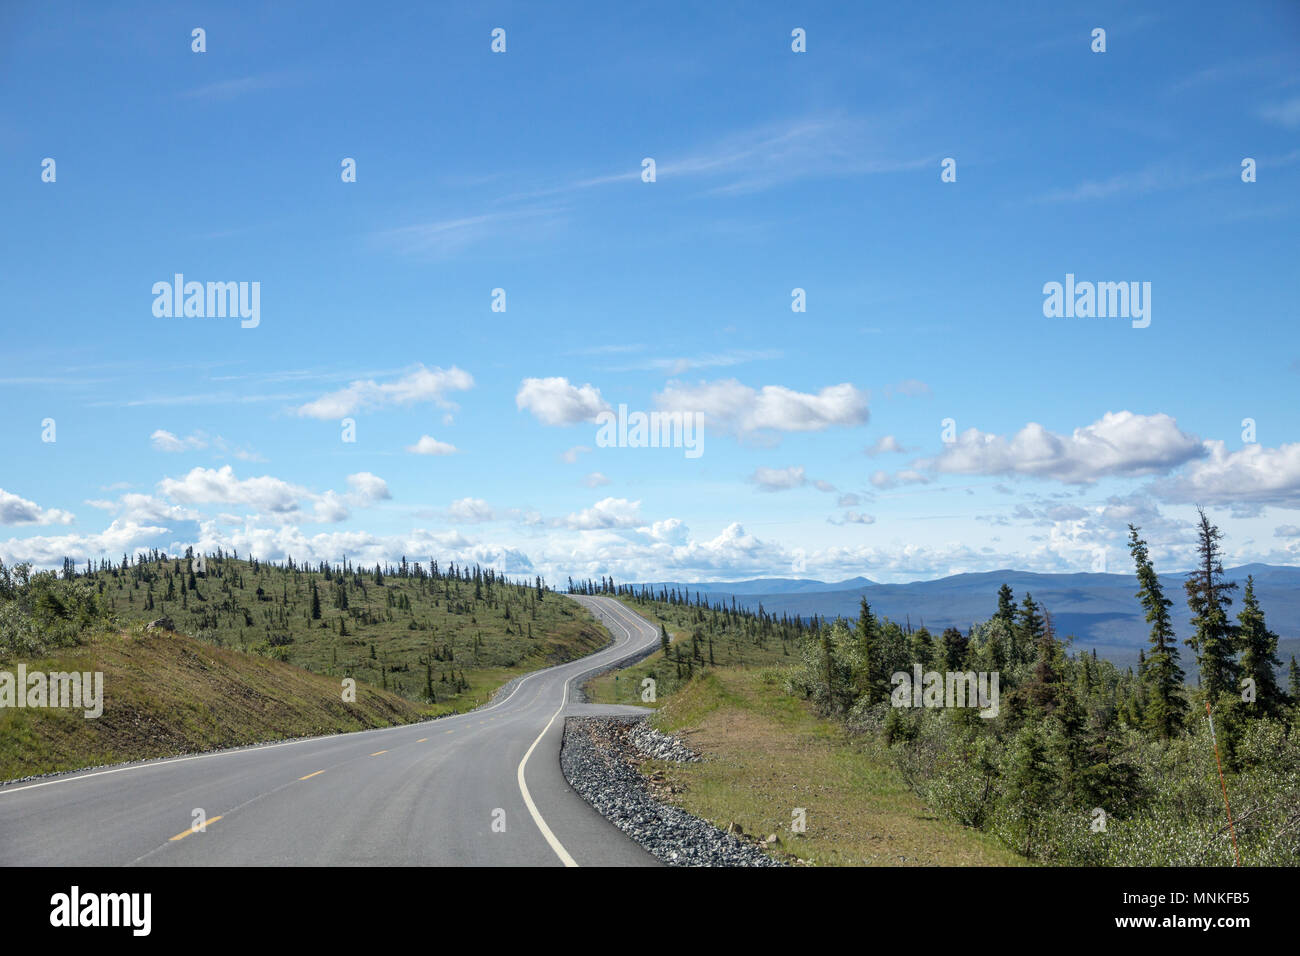 Aptly named 'Top of the World' Highway links Chicken, Alaska with Dawson City, Yukon. Winding along tops of mountain ridges road passes stunted forest Stock Photo